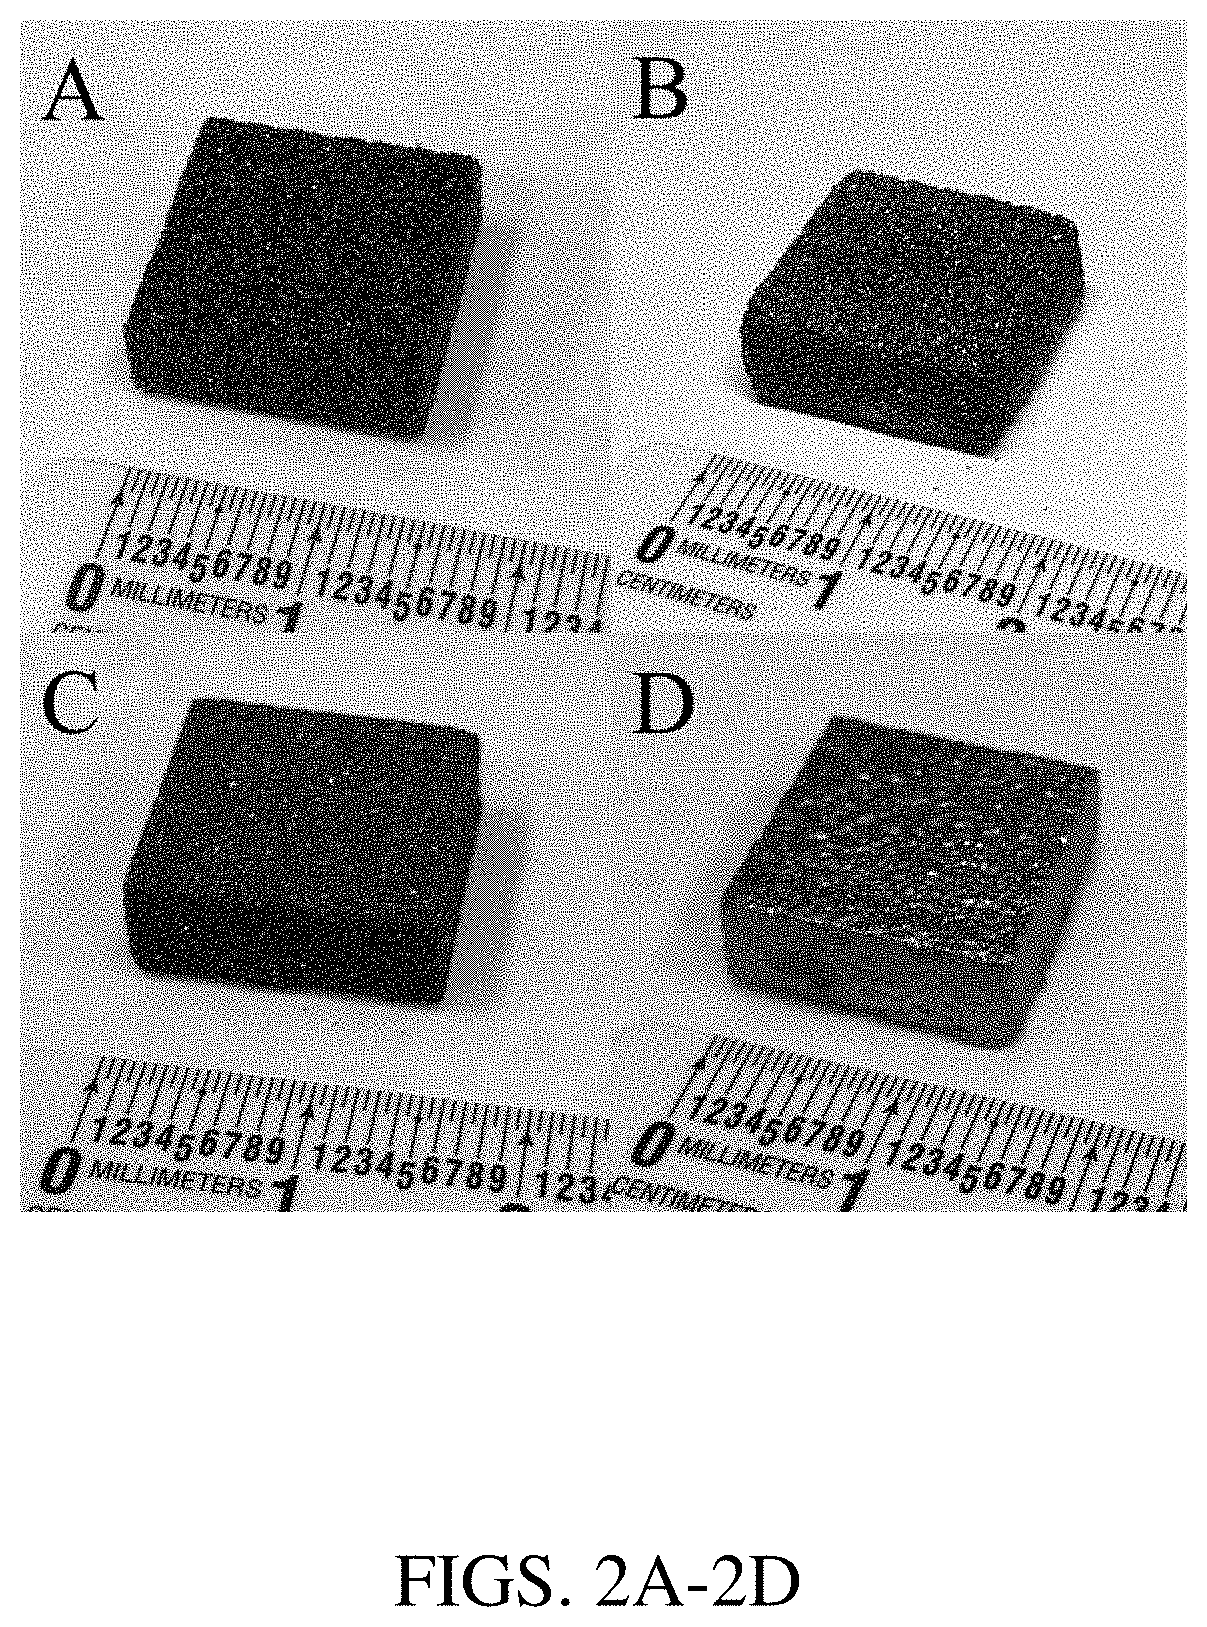 INDIRECT ADDITIVE MANUFACTURING PROCESS FOR PRODUCING SiC-B4C-Si COMPOSITES